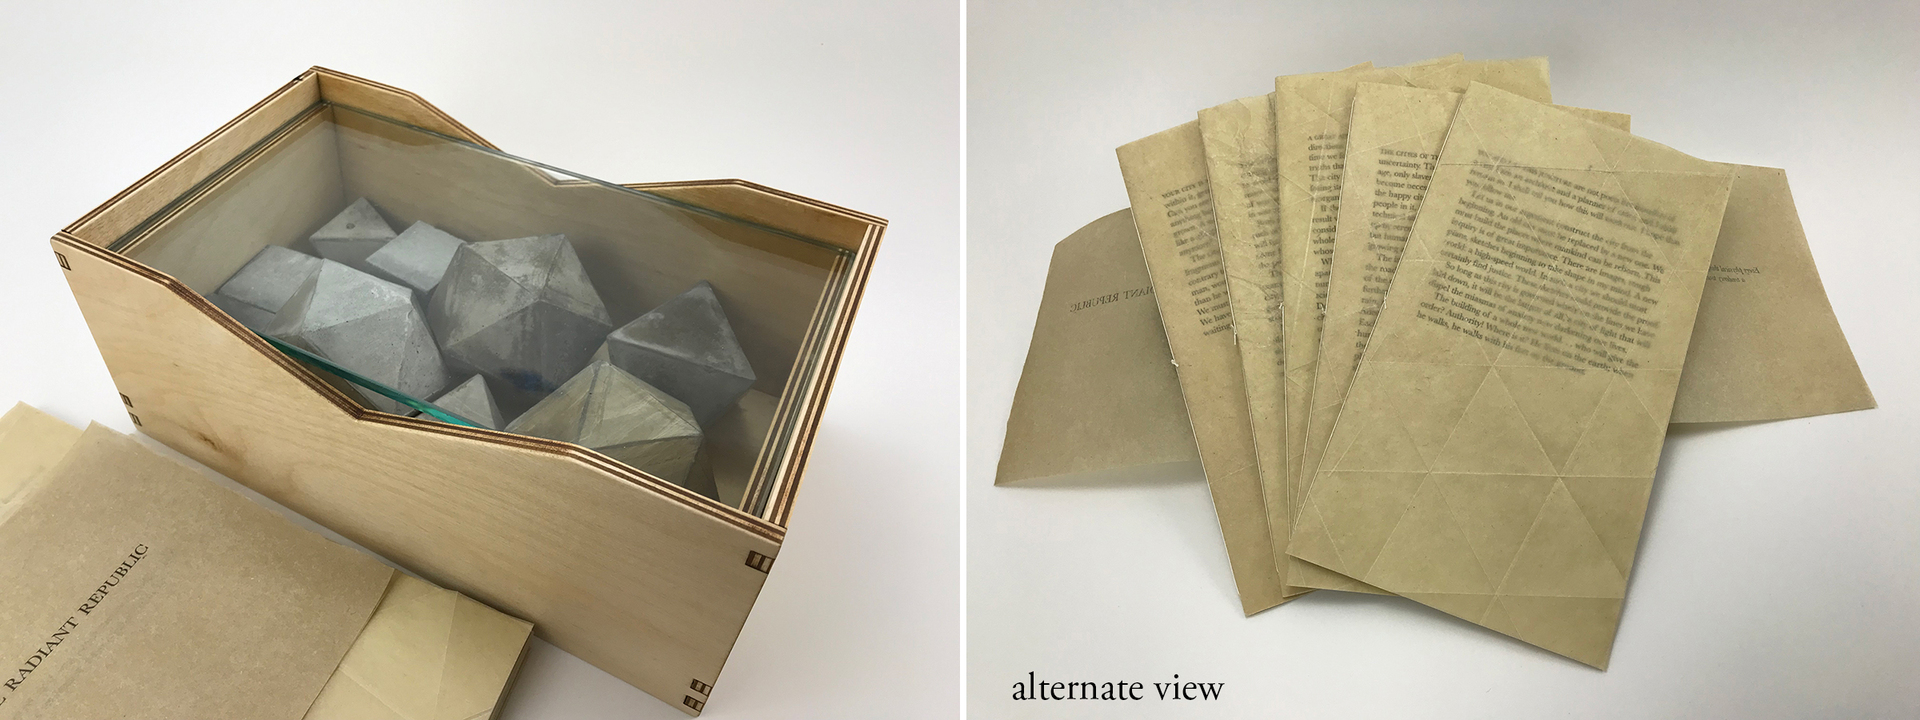 a handmade book with the title "The Radiant Republic" and enclosed in a wooden box with glass that holds weathered platonic solid cast in cement.